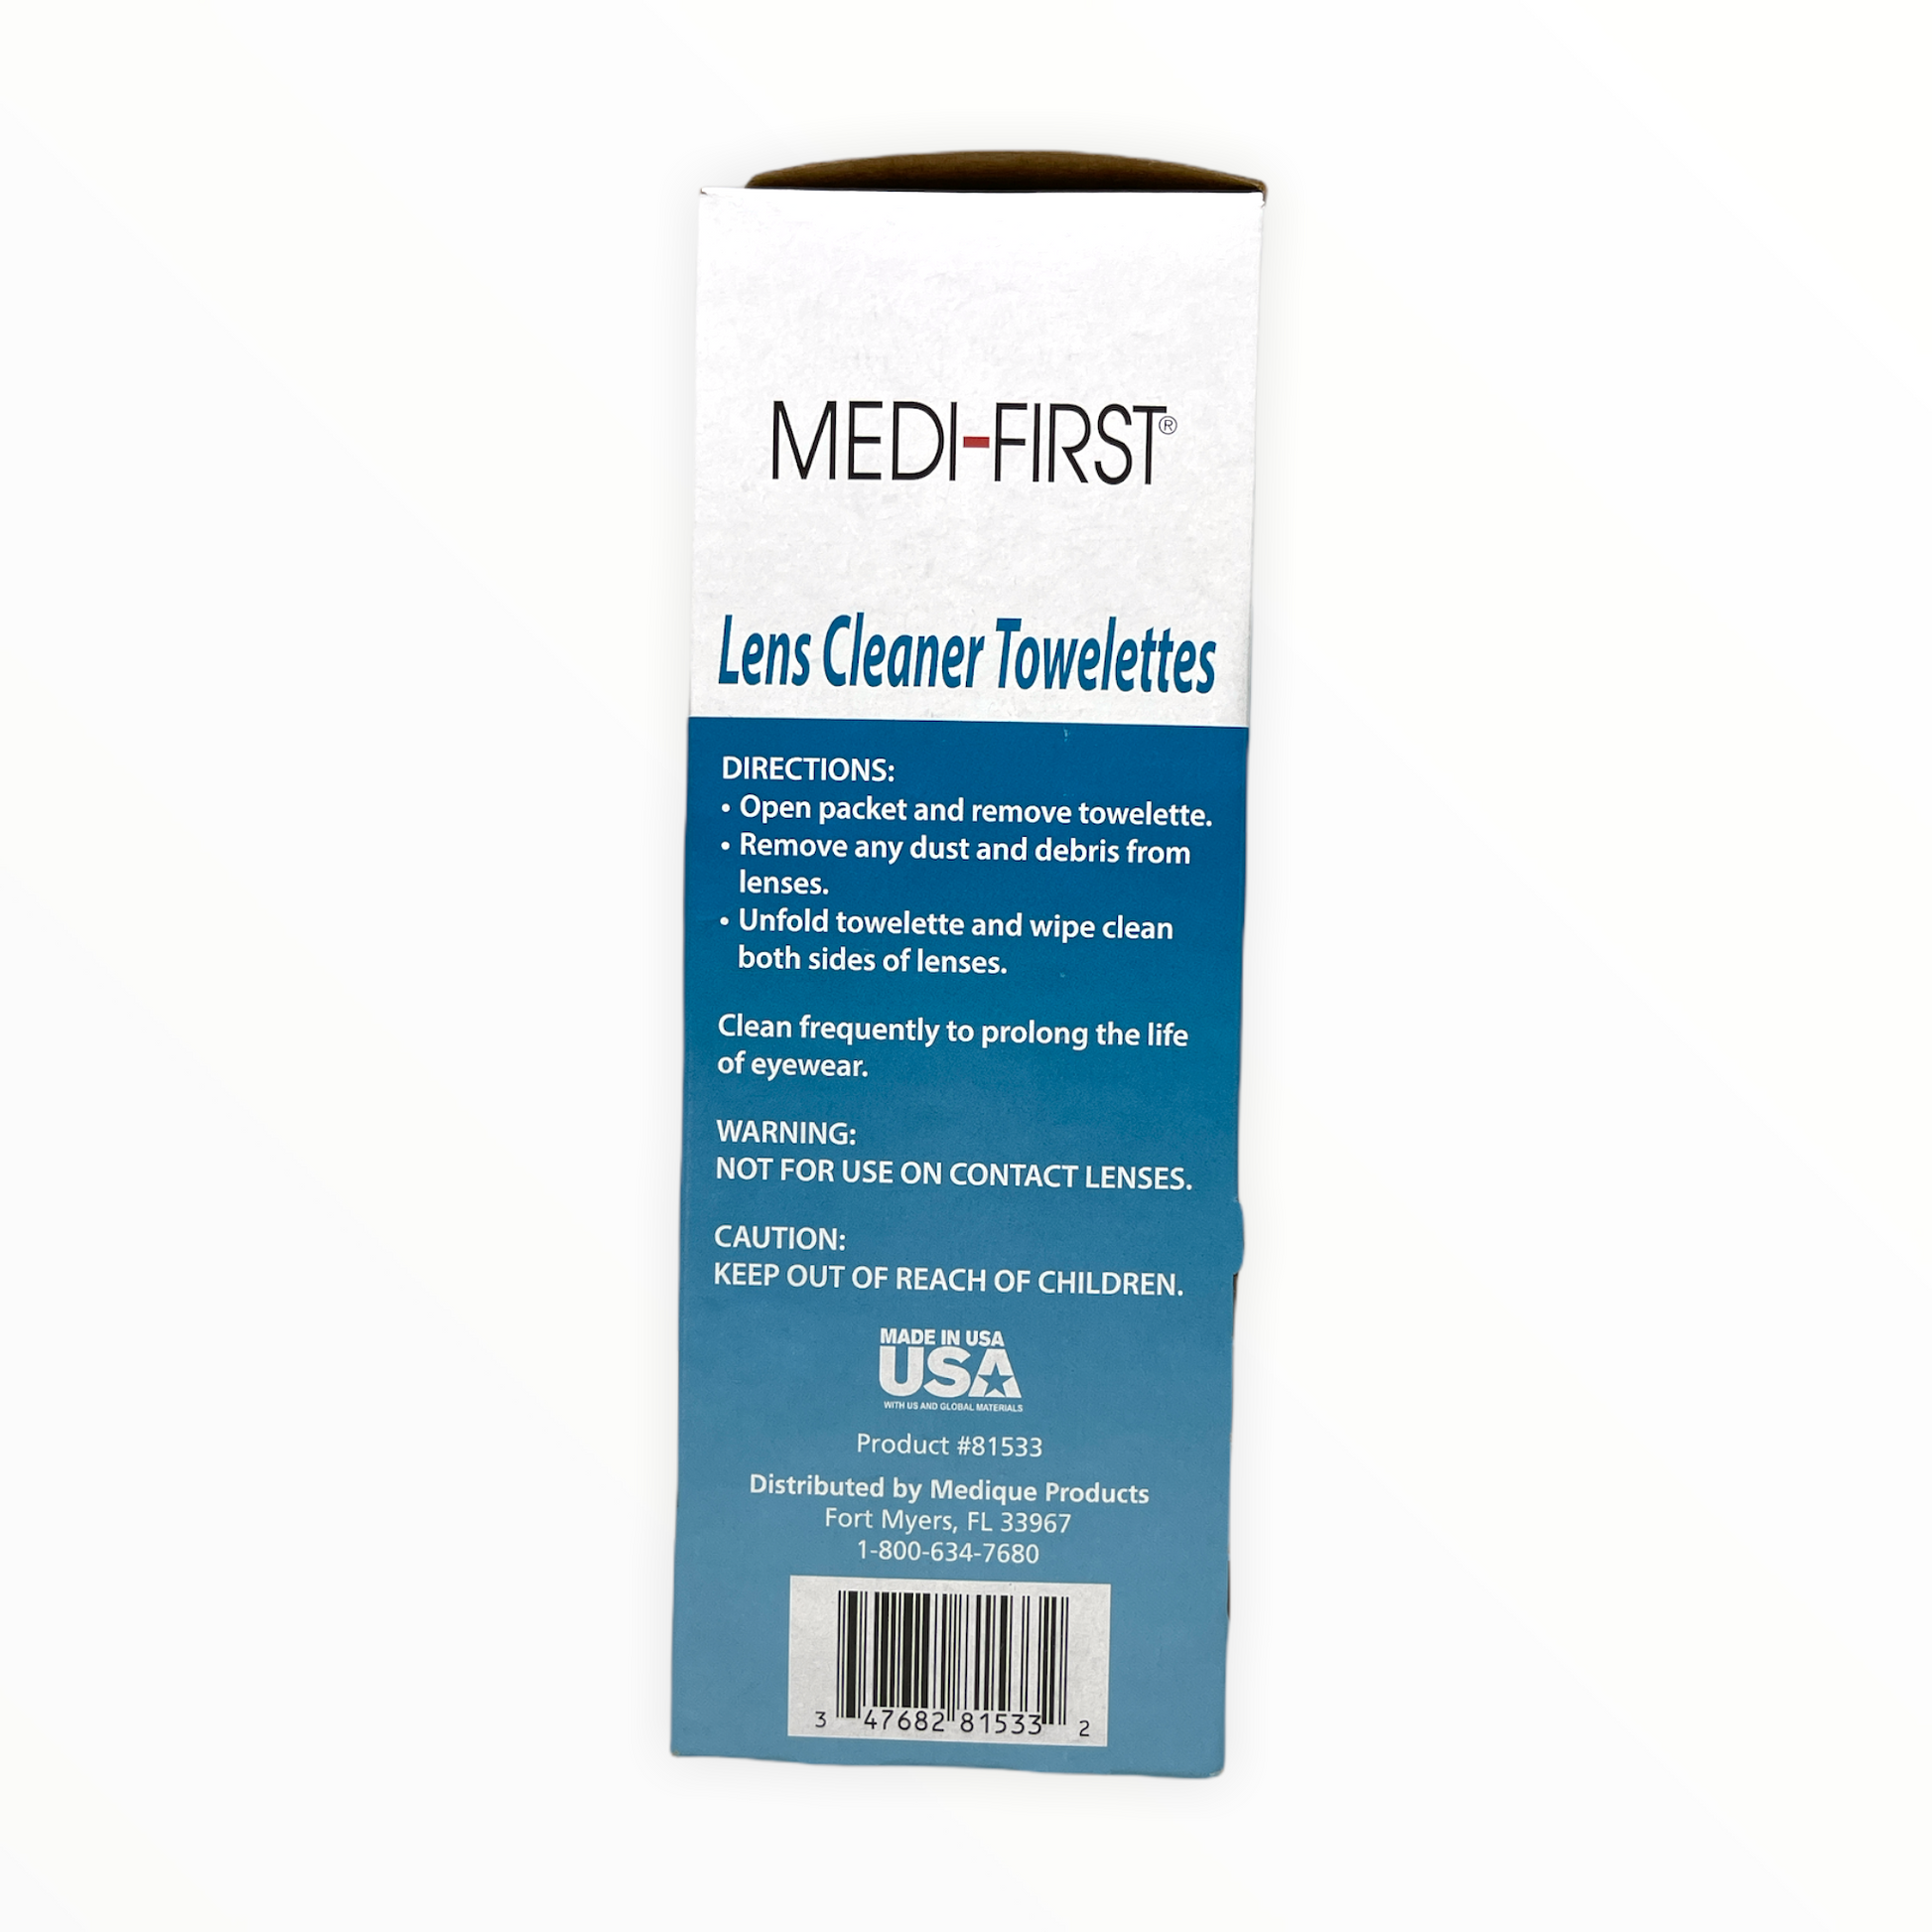 Lens Cleaner Towelettes